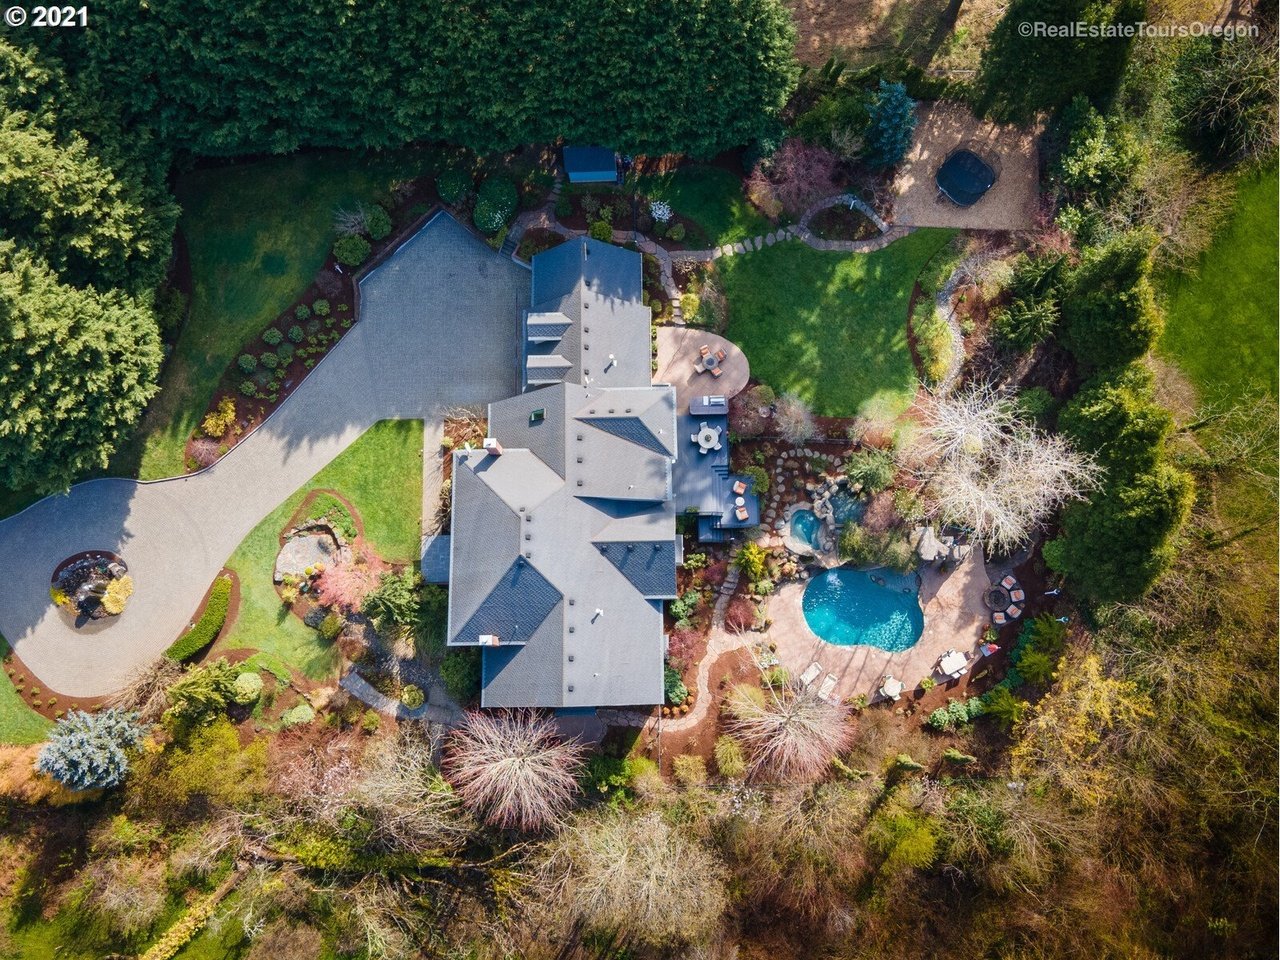 Featured Listing. Top Agent. Luxury Home. Oregon Choice Group. Portland Area Buyers Agents. Buyers Advocates in the Portland Oregon Region. Trusted Realtors for Home Buyers.